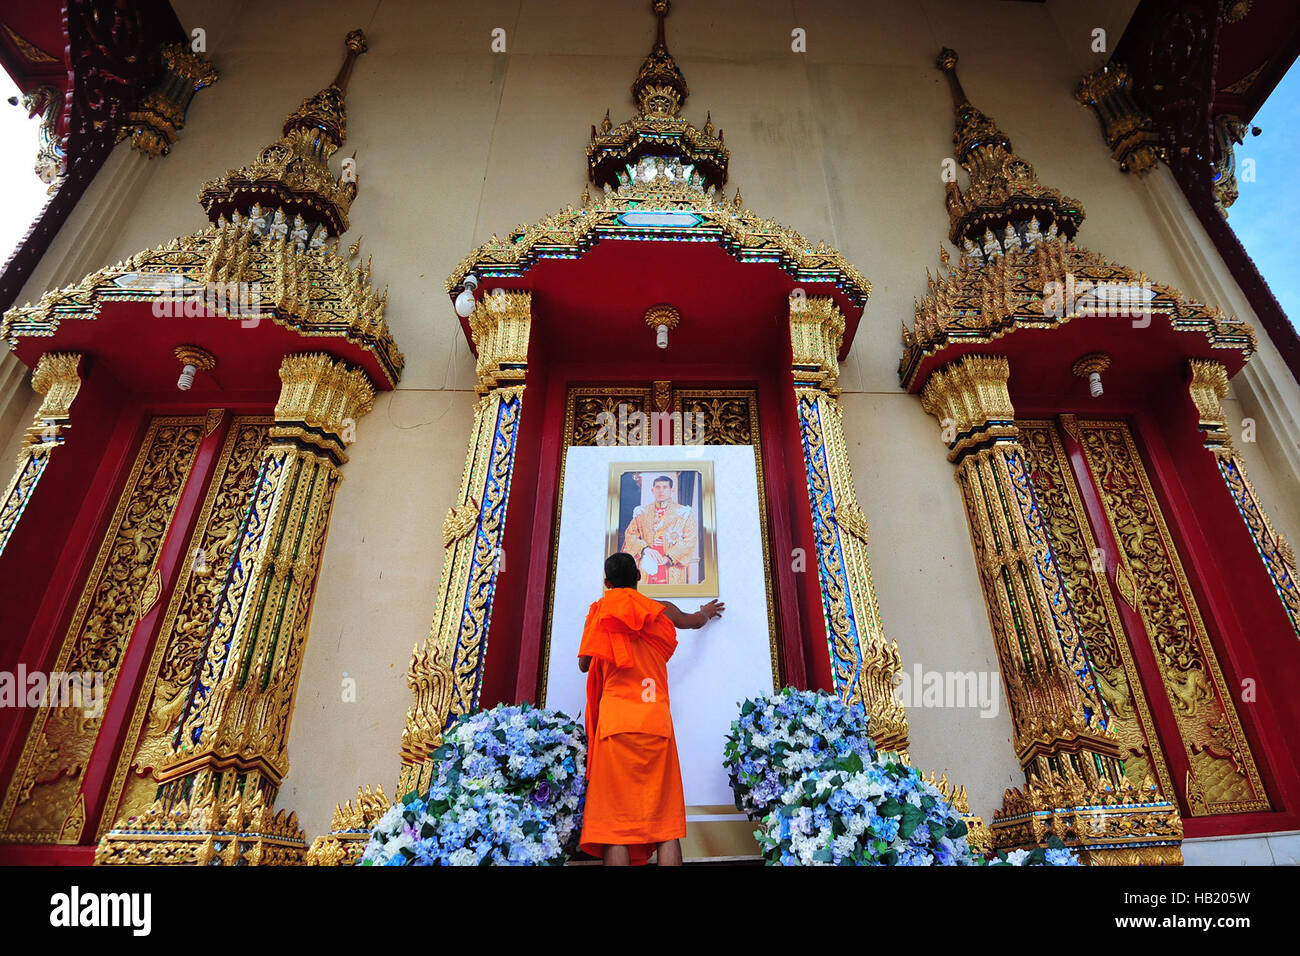 Beijing, Thailand. 2nd Dec, 2016. A monk looks at a portrait of Thailand's new King Maha Vajiralongkorn in Bangkok, Thailand, Dec. 2, 2016. Thailand's Crown Prince Maha Vajiralongkorn accepted invitation from parliament president to ascend to the throne and thus formally proclaimed King Rama X in a televised ceremony. © Rachen Sageamsak/Xinhua/Alamy Live News Stock Photo